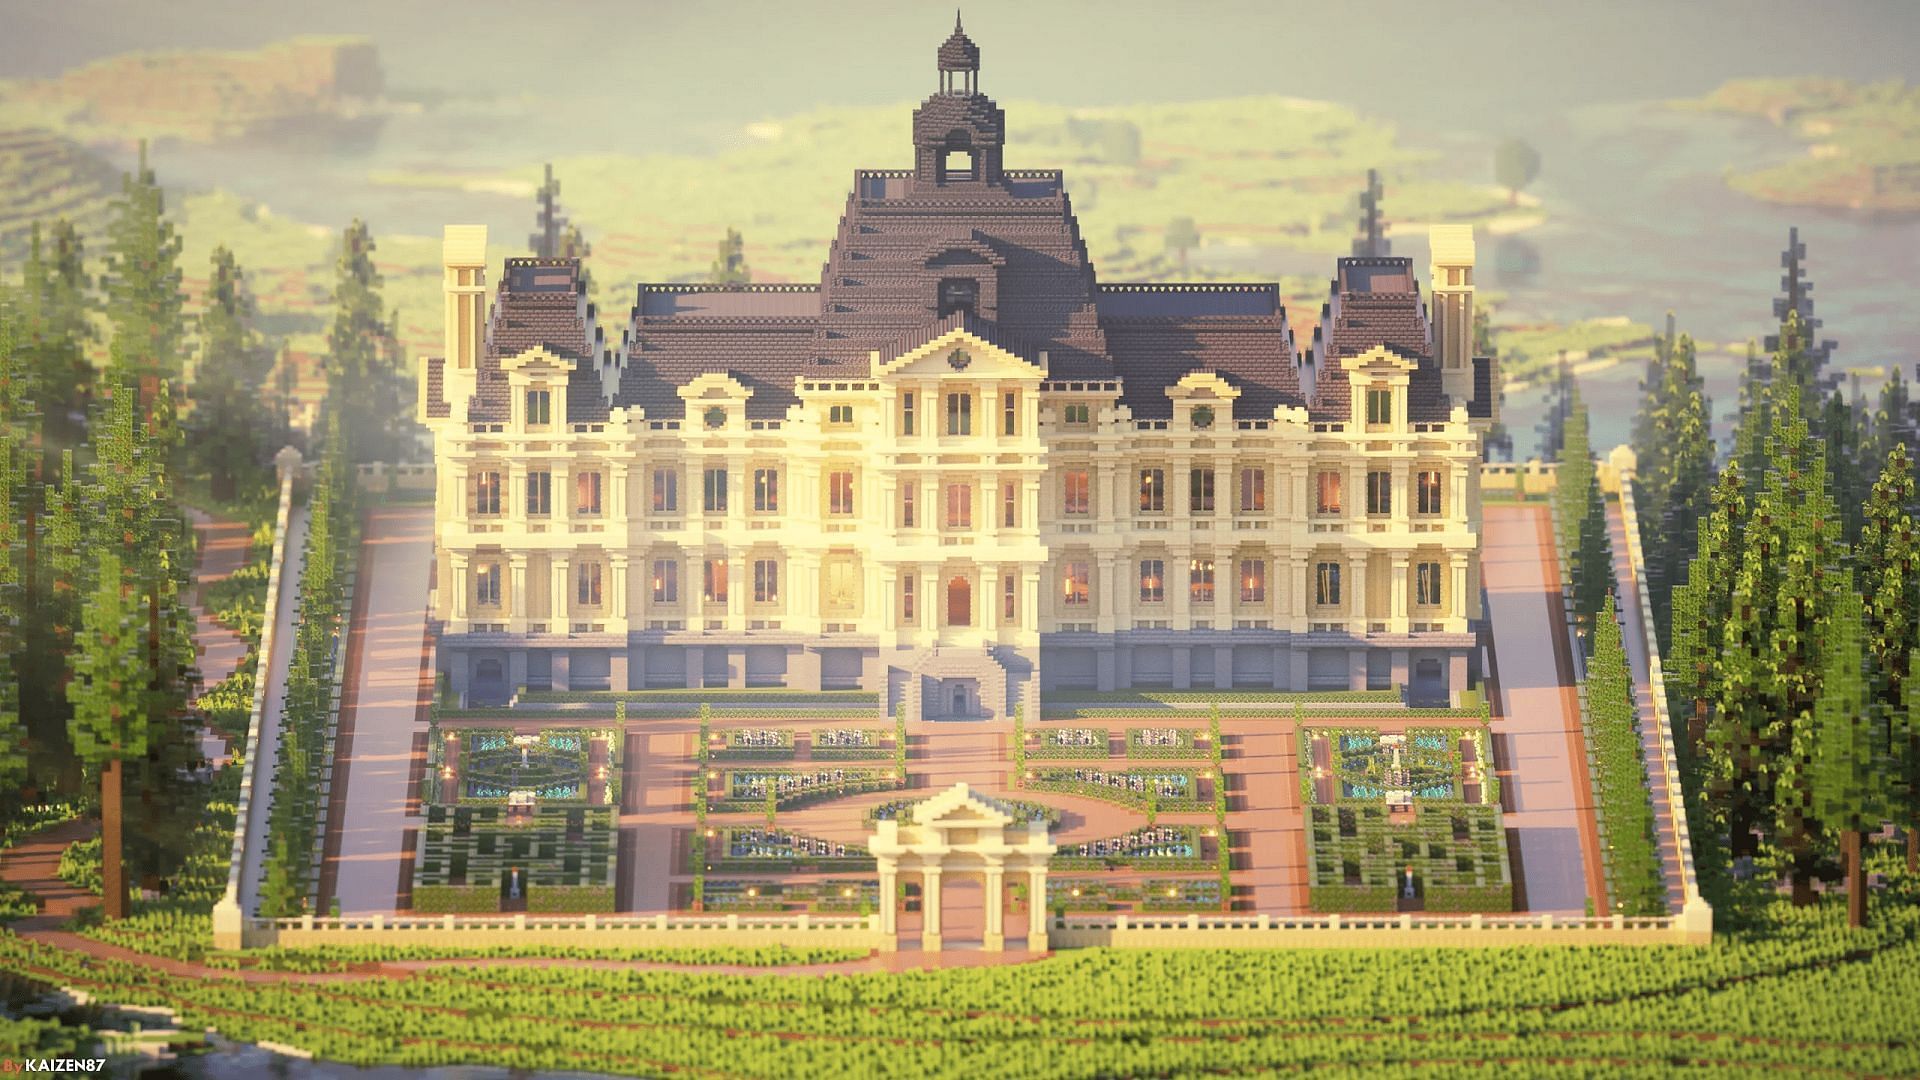 A French chateau-styled mansion created by a Minecraft player.